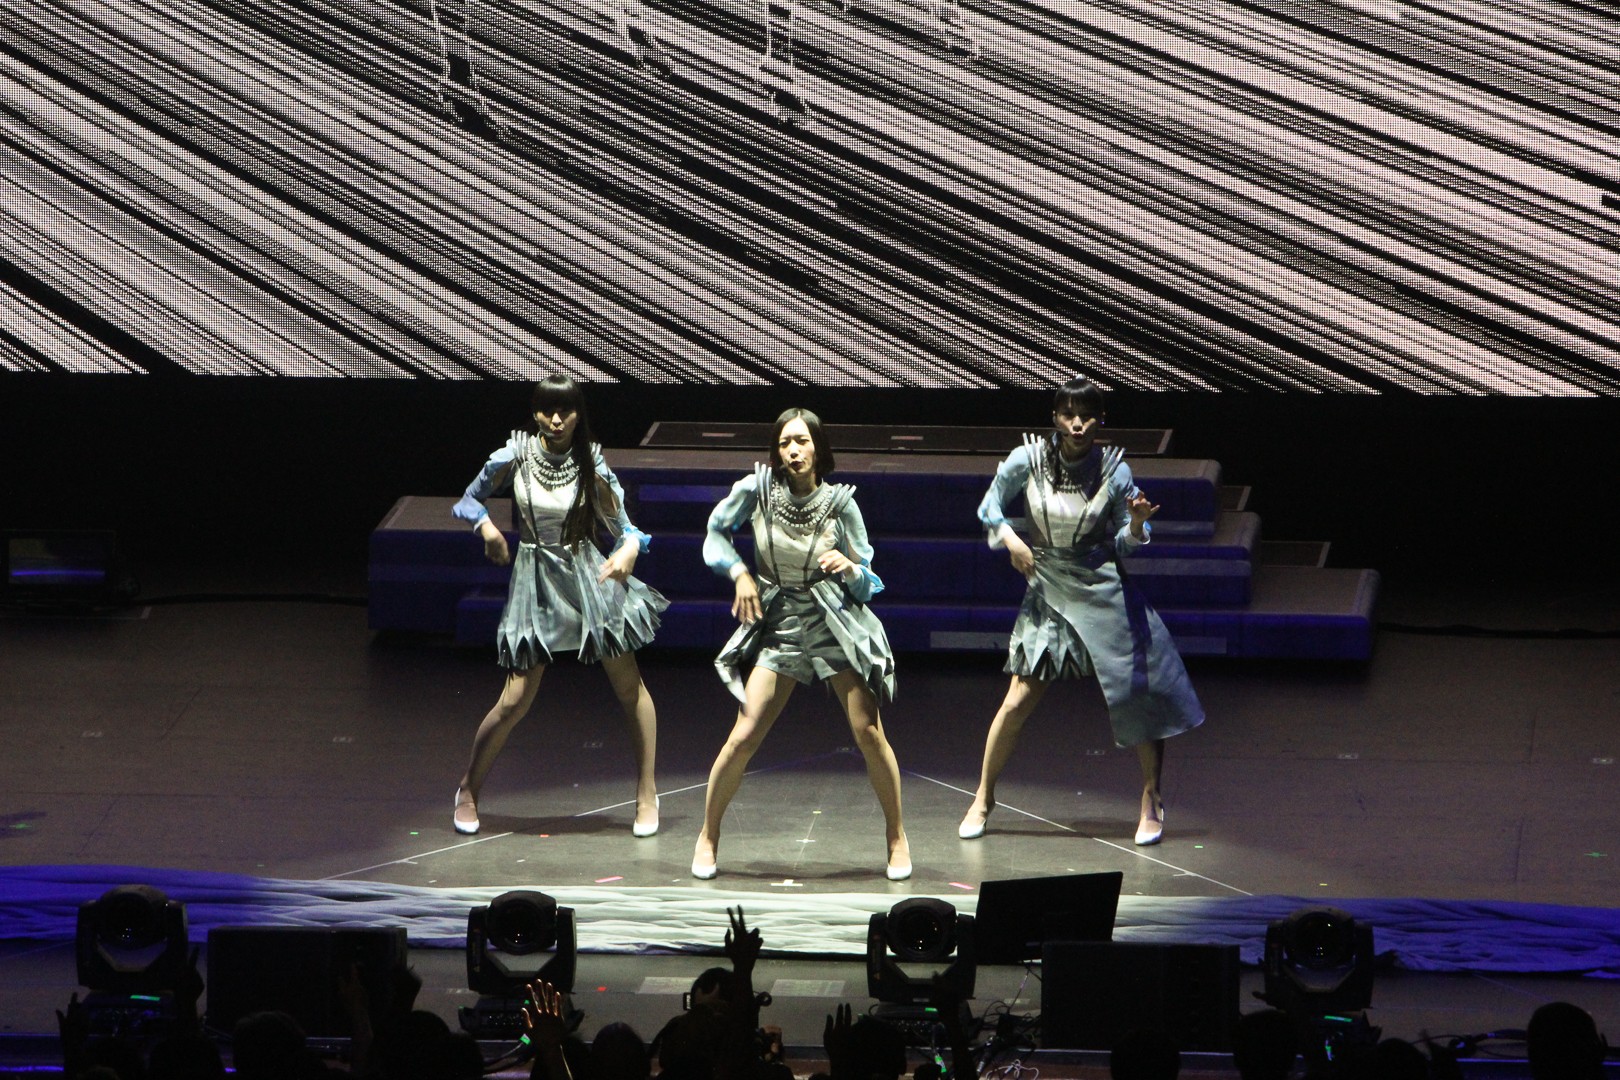 J-pop girl group Perfume performing in San Jose, California in April. Perfume’s tour in the US was a big step for Japanese music outside Asia. The band’s appearance at the Coachella Valley Music and Arts Festival was well received, with Rolling Stone magazine naming their performance one of the 16 best performances at the music event. Photo: Jason Yu